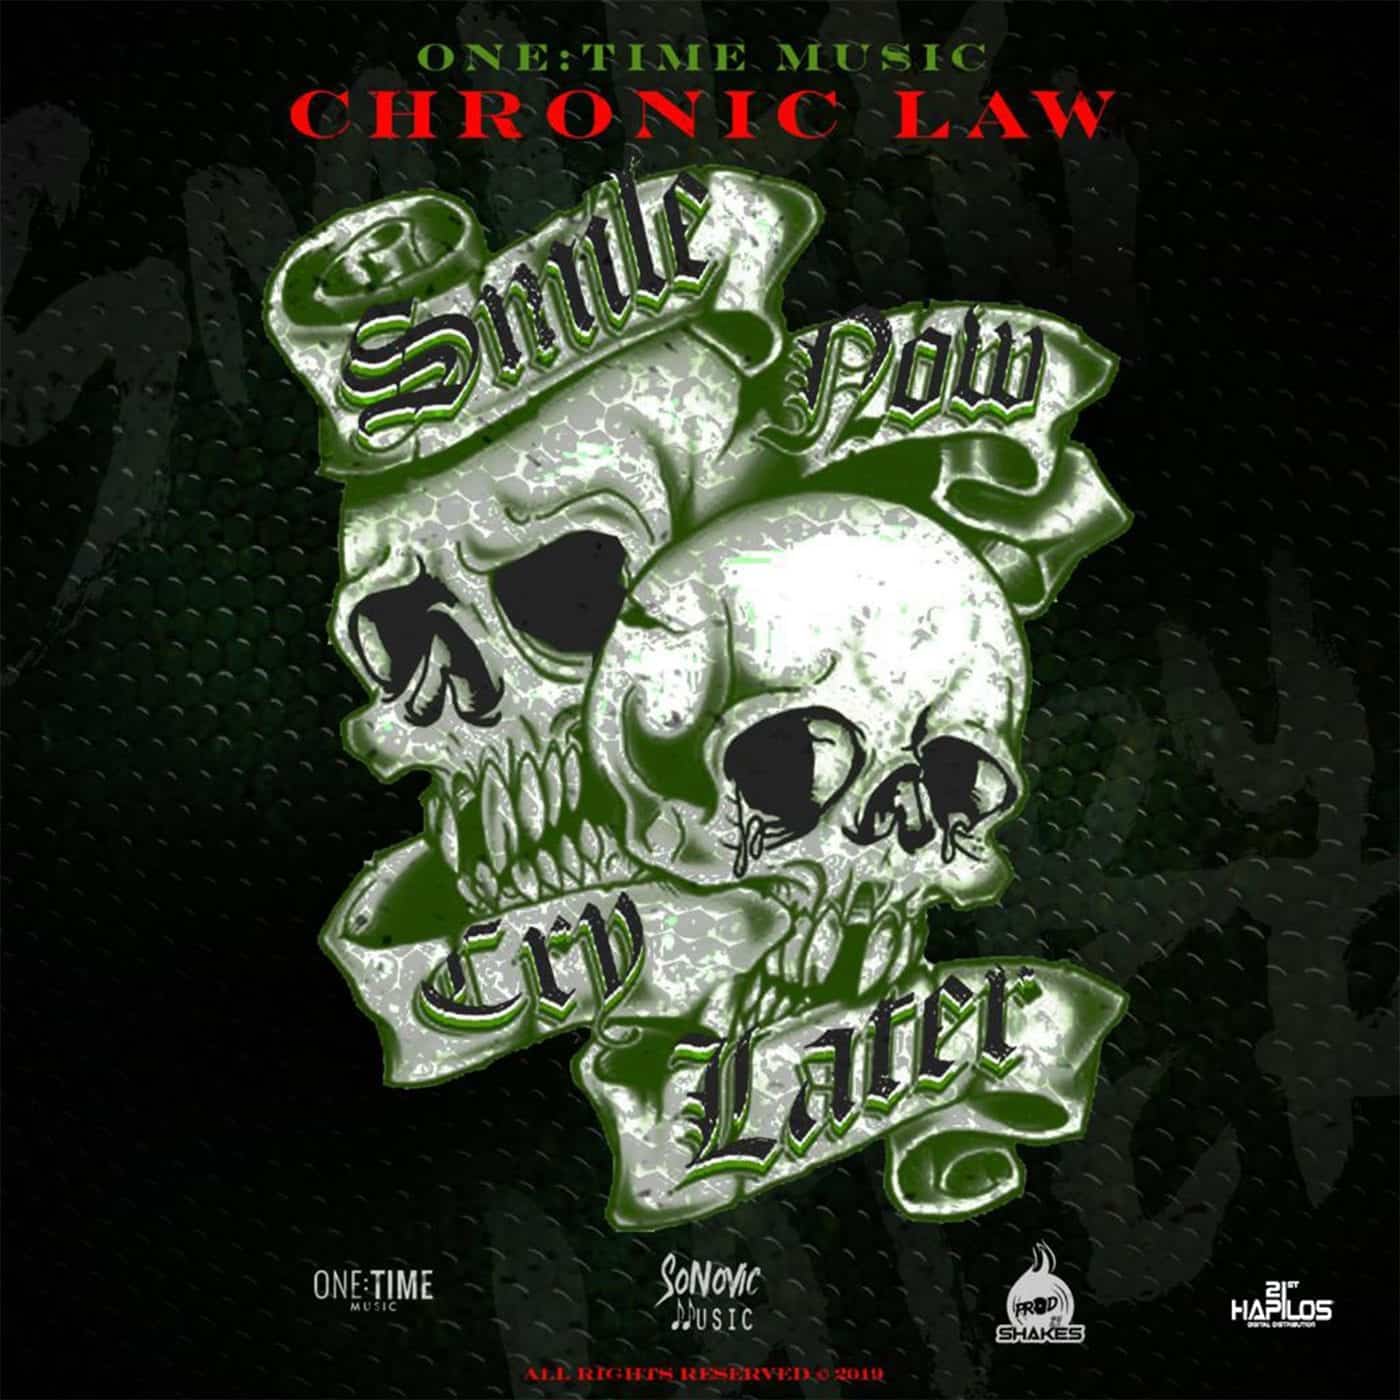 Chronic Law - Smile Now Cry Later - One Time Music / Sonovic Music / U.E. Records